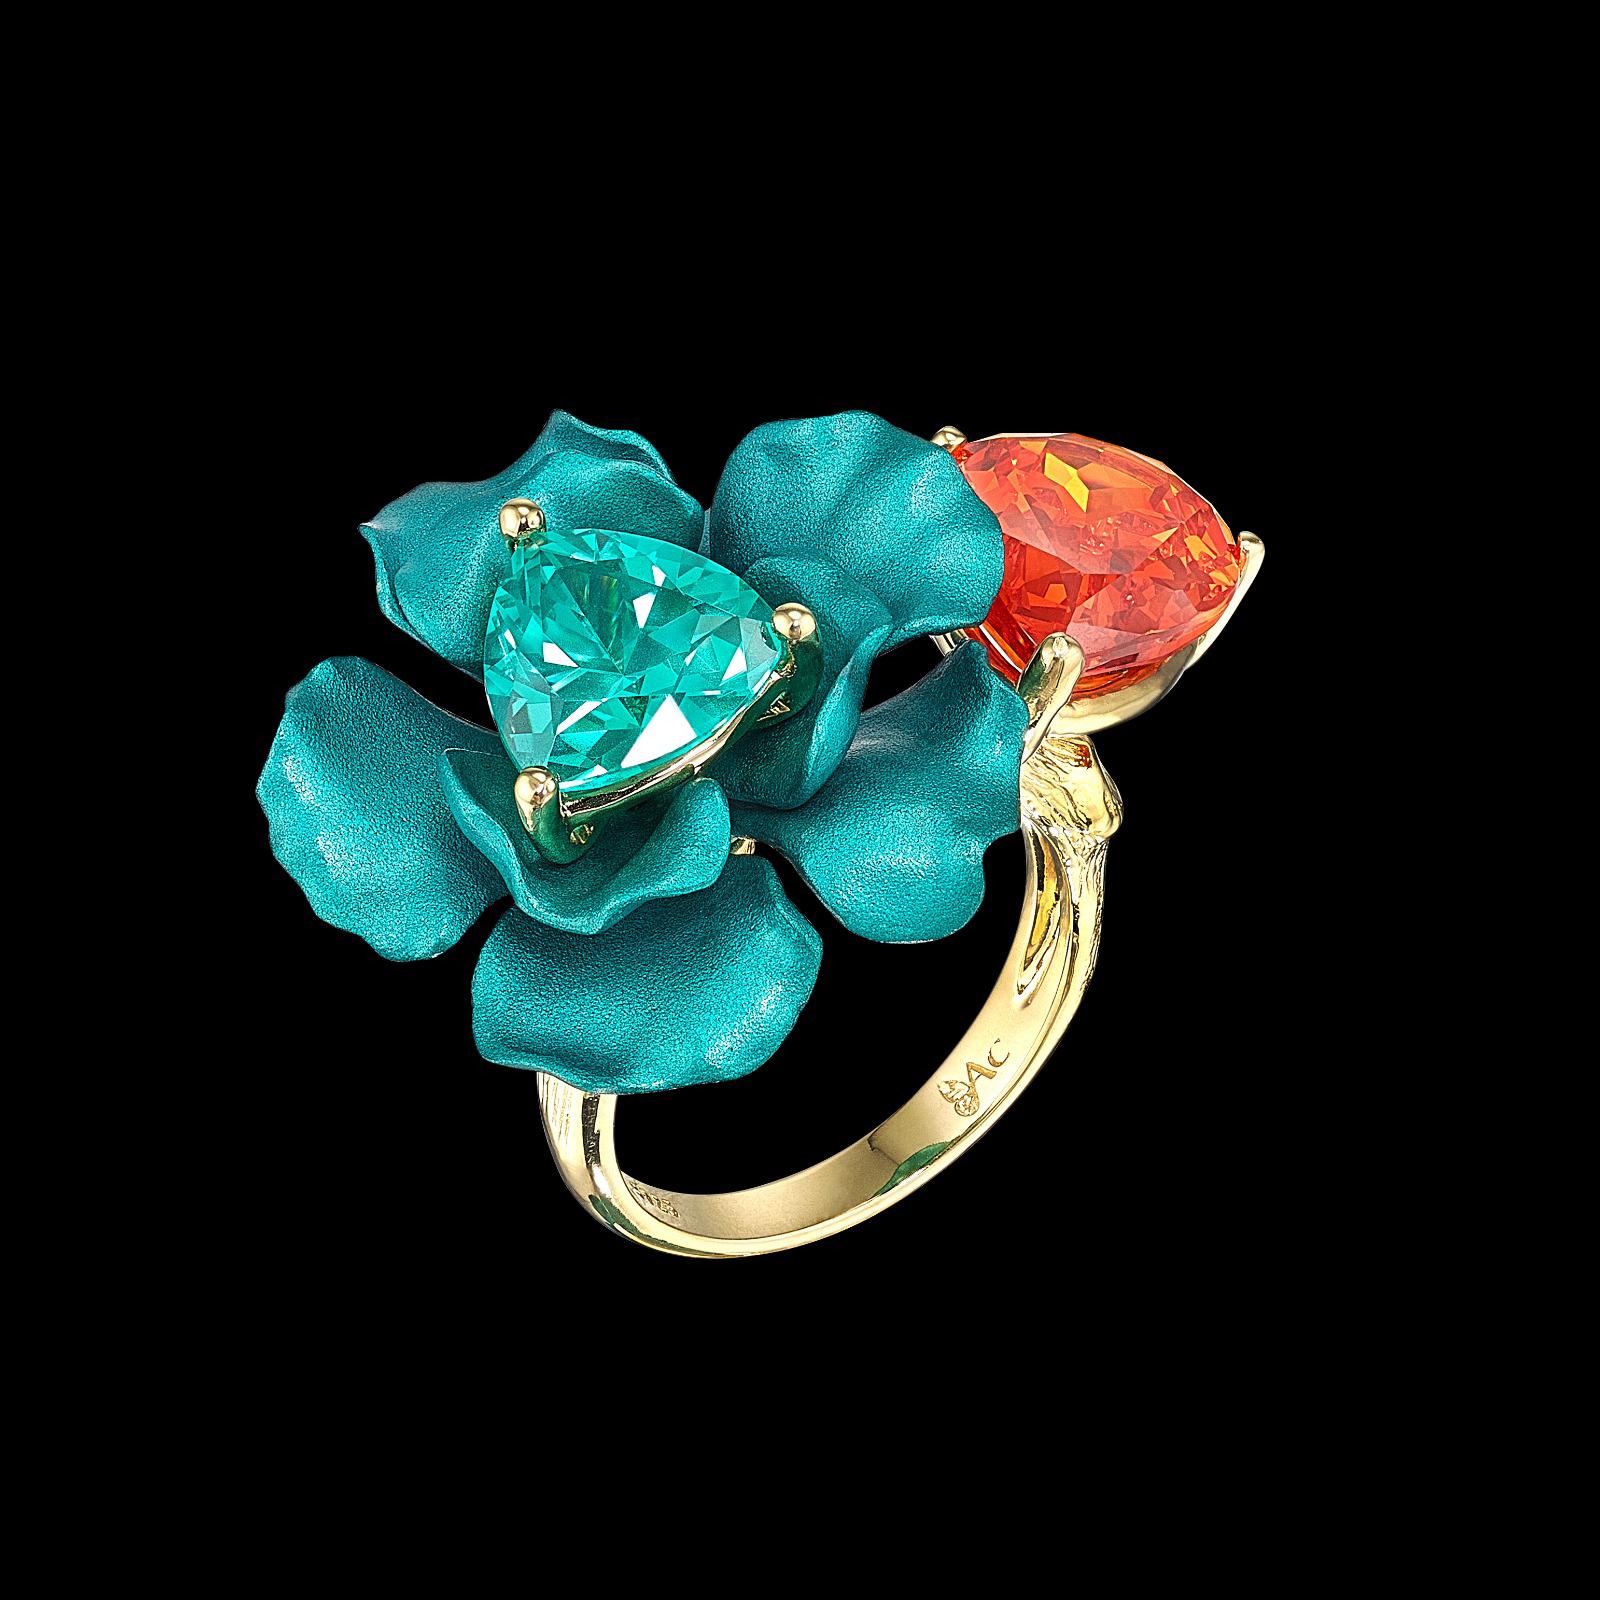 Mandarin Paraiba Bloom Ring, Ring, Anabela Chan Joaillerie - Fine jewelry with laboratory grown and created gemstones hand-crafted in the United Kingdom. Anabela Chan Joaillerie is the first fine jewellery brand in the world to champion laboratory-grown and created gemstones with high jewellery design, artisanal craftsmanship and a focus on ethical and sustainable innovations.